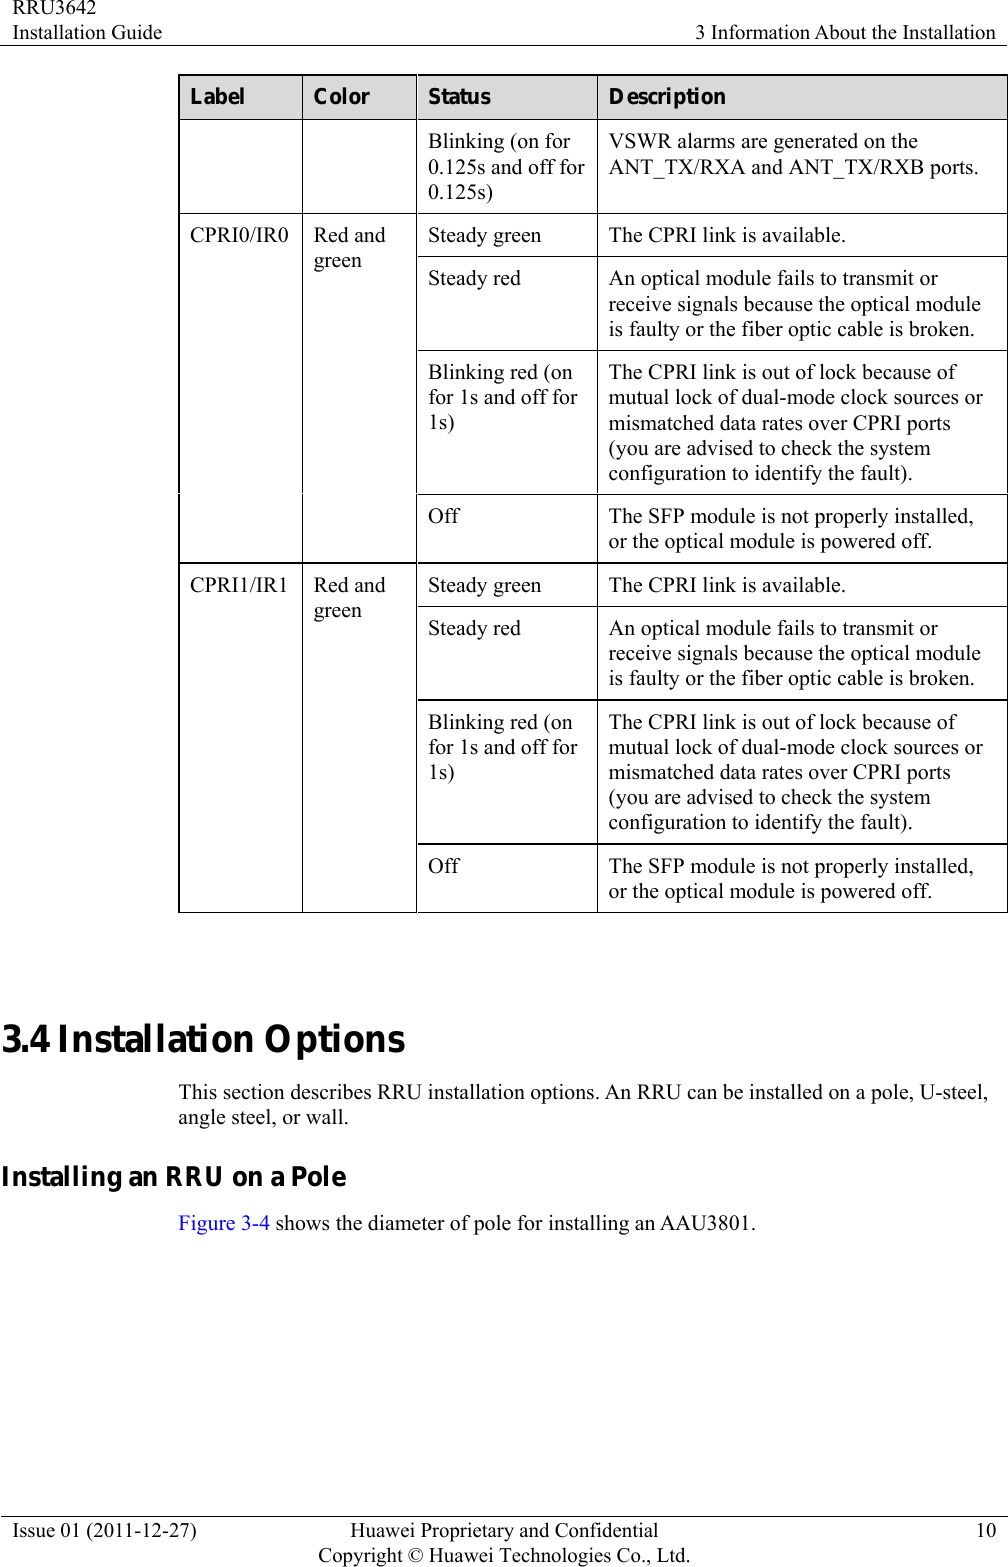 RRU3642 Installation Guide  3 Information About the Installation Issue 01 (2011-12-27)  Huawei Proprietary and Confidential         Copyright © Huawei Technologies Co., Ltd.10 Label  Color  Status  Description Blinking (on for 0.125s and off for 0.125s) VSWR alarms are generated on the ANT_TX/RXA and ANT_TX/RXB ports. CPRI0/IR0 Red and green Steady green  The CPRI link is available. Steady red  An optical module fails to transmit or receive signals because the optical module is faulty or the fiber optic cable is broken. Blinking red (on for 1s and off for 1s) The CPRI link is out of lock because of mutual lock of dual-mode clock sources or mismatched data rates over CPRI ports (you are advised to check the system configuration to identify the fault). Off  The SFP module is not properly installed, or the optical module is powered off. CPRI1/IR1 Red and green Steady green  The CPRI link is available. Steady red  An optical module fails to transmit or receive signals because the optical module is faulty or the fiber optic cable is broken. Blinking red (on for 1s and off for 1s) The CPRI link is out of lock because of mutual lock of dual-mode clock sources or mismatched data rates over CPRI ports (you are advised to check the system configuration to identify the fault). Off  The SFP module is not properly installed, or the optical module is powered off.  3.4 Installation Options This section describes RRU installation options. An RRU can be installed on a pole, U-steel, angle steel, or wall. Installing an RRU on a Pole Figure 3-4 shows the diameter of pole for installing an AAU3801. 